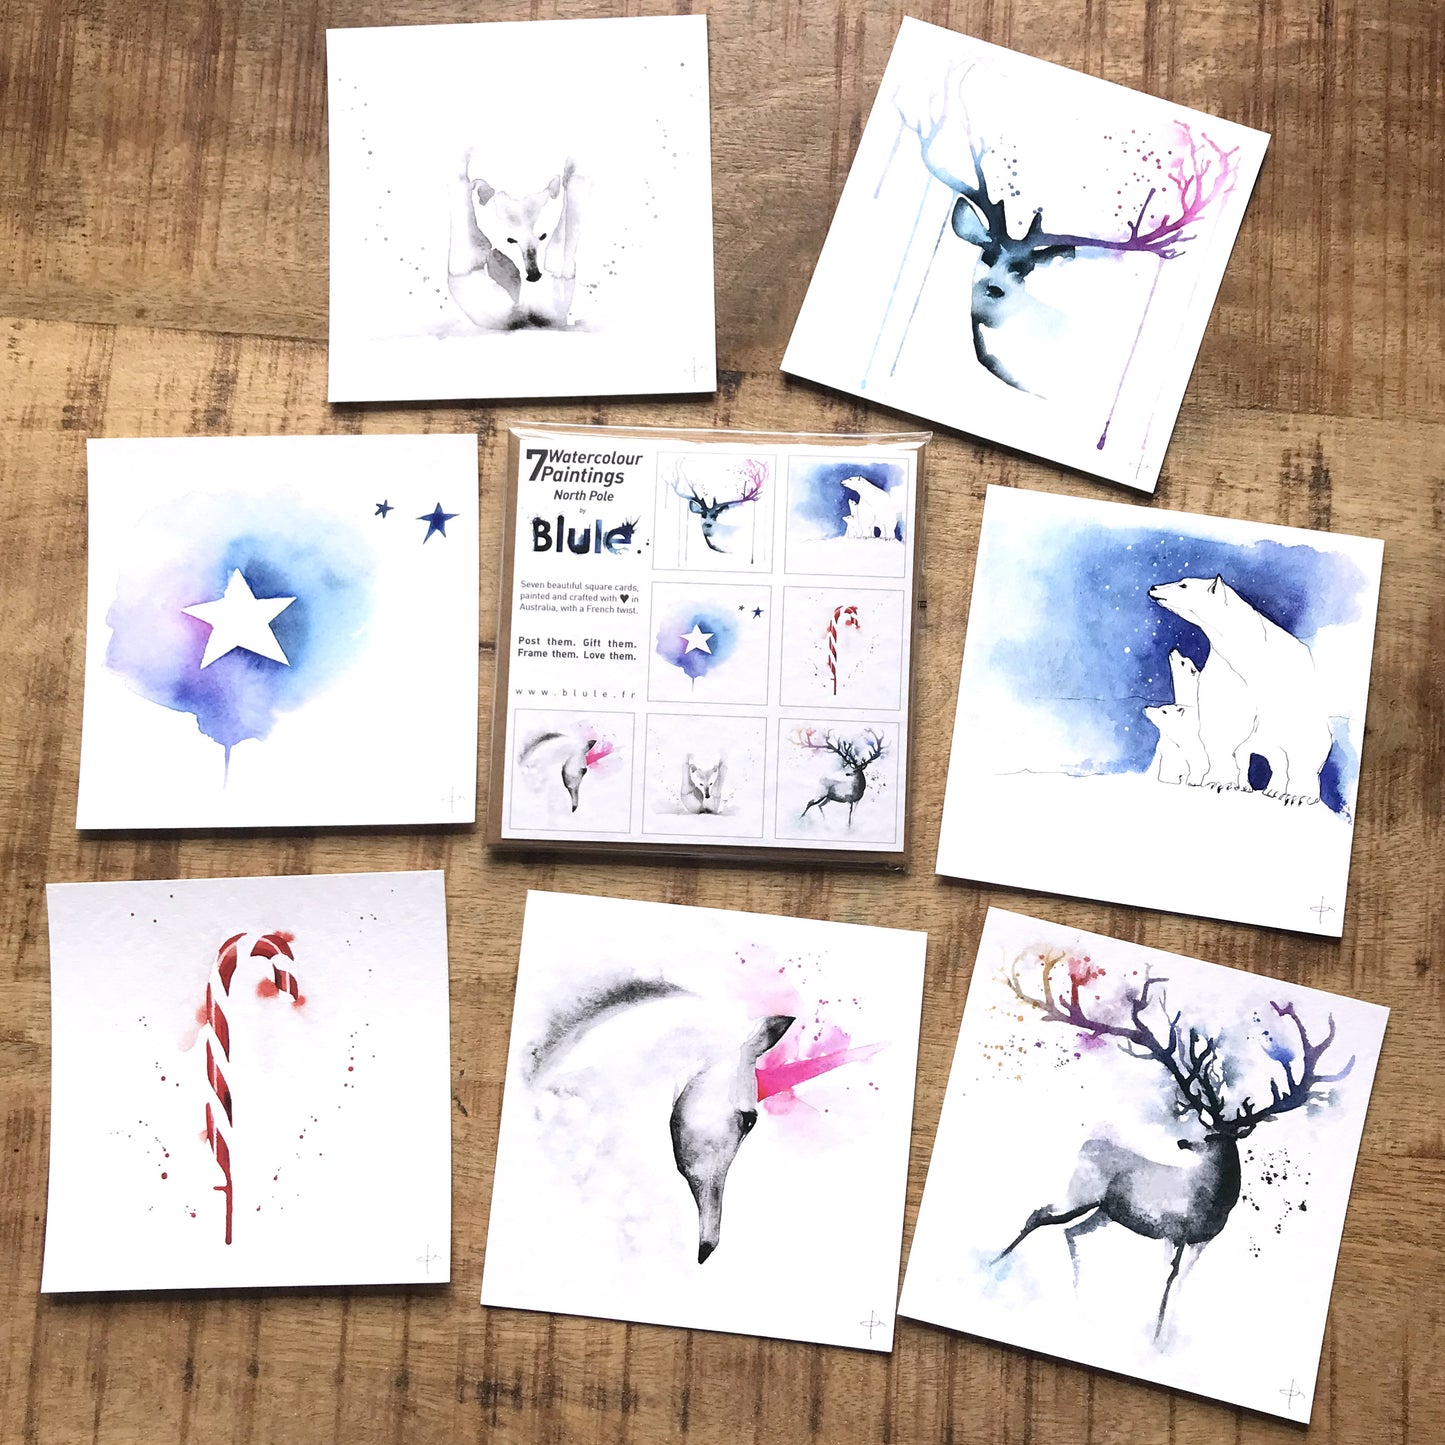 7 Watercolour Cards Paintings "North Pole "